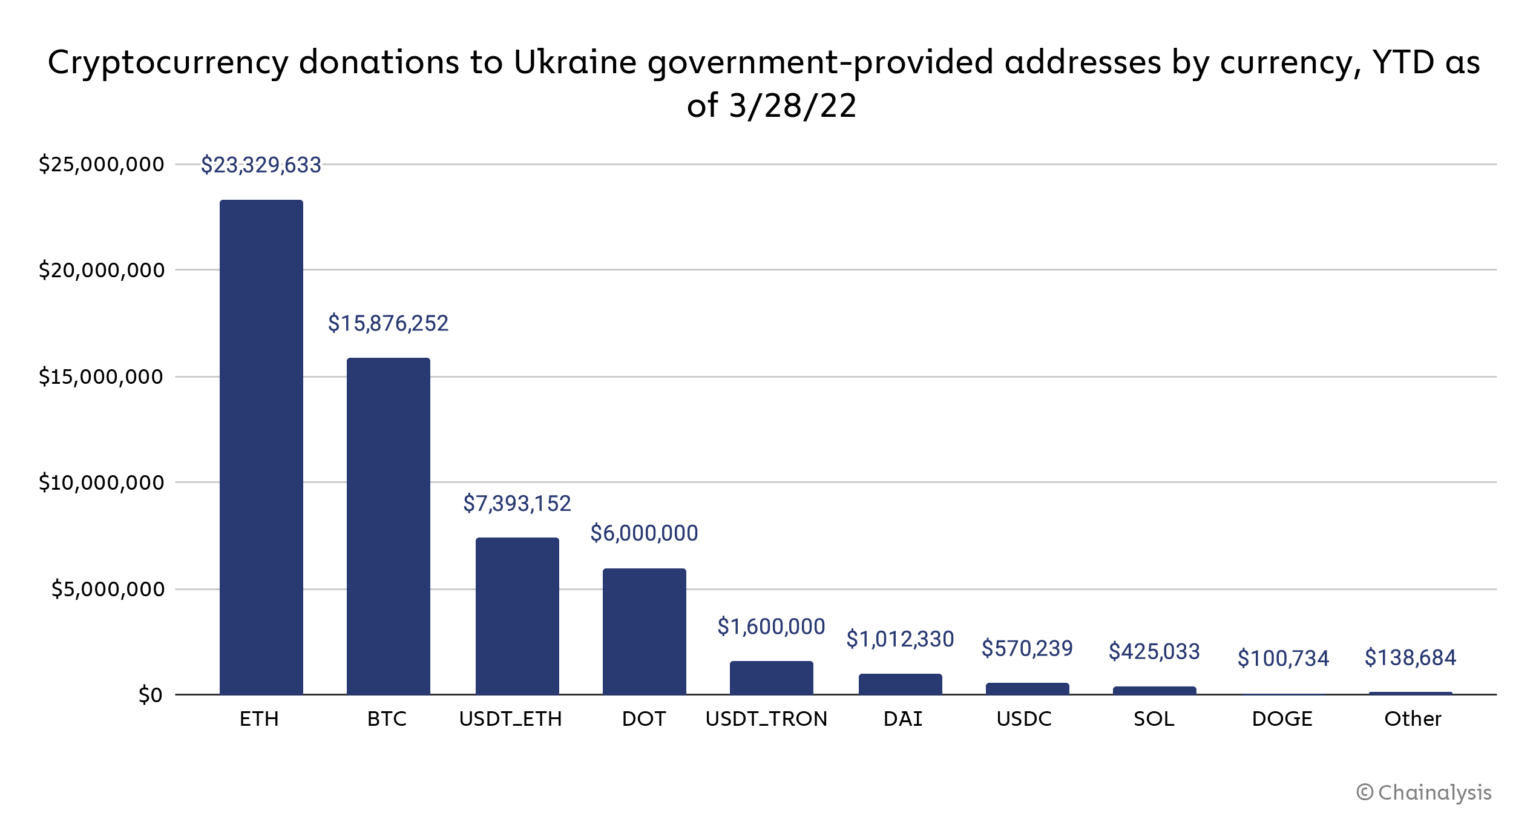 Chart showing crypto donations to Ukraine